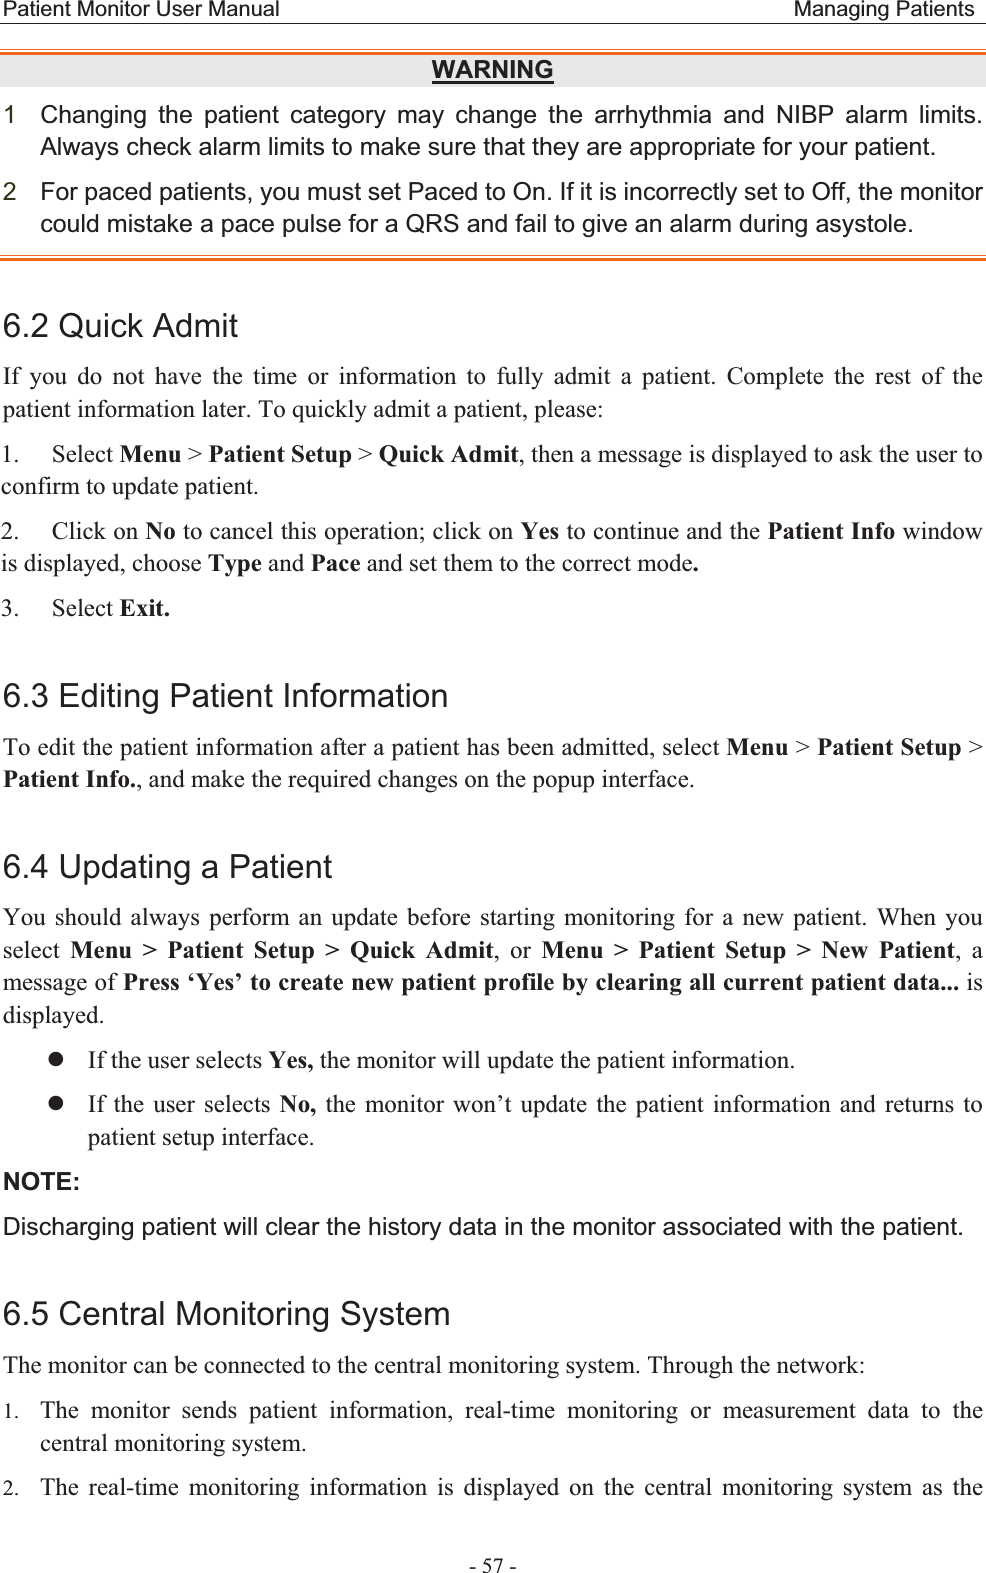 Patient Monitor User Manual                                               Managing Patients  - 57 - WARNING1Changing the patient category may change the arrhythmia and NIBP alarm limits. Always check alarm limits to make sure that they are appropriate for your patient. 2For paced patients, you must set Paced to On. If it is incorrectly set to Off, the monitor could mistake a pace pulse for a QRS and fail to give an alarm during asystole. 6.2 Quick Admit If you do not have the time or information to fully admit a patient. Complete the rest of the patient information later. To quickly admit a patient, please: 1. Select Menu &gt; Patient Setup &gt; Quick Admit, then a message is displayed to ask the user to confirm to update patient. 2. Click on No to cancel this operation; click on Yes to continue and the Patient Info window is displayed, choose Type and Pace and set them to the correct mode. 3. Select Exit. 6.3 Editing Patient Information To edit the patient information after a patient has been admitted, select Menu &gt; Patient Setup &gt;Patient Info., and make the required changes on the popup interface. 6.4 Updating a Patient You should always perform an update before starting monitoring for a new patient. When you select  Menu &gt; Patient Setup &gt; Quick Admit, or Menu &gt; Patient Setup &gt; New Patient,a message of Press ‘Yes’ to create new patient profile by clearing all current patient data... is displayed. zIf the user selects Yes, the monitor will update the patient information. zIf the user selects No, the monitor won’t update the patient information and returns to patient setup interface. NOTE:Discharging patient will clear the history data in the monitor associated with the patient. 6.5 Central Monitoring System The monitor can be connected to the central monitoring system. Through the network: 1. The monitor sends patient information, real-time monitoring or measurement data to the central monitoring system. 2. The real-time monitoring information is displayed on the central monitoring system as the 